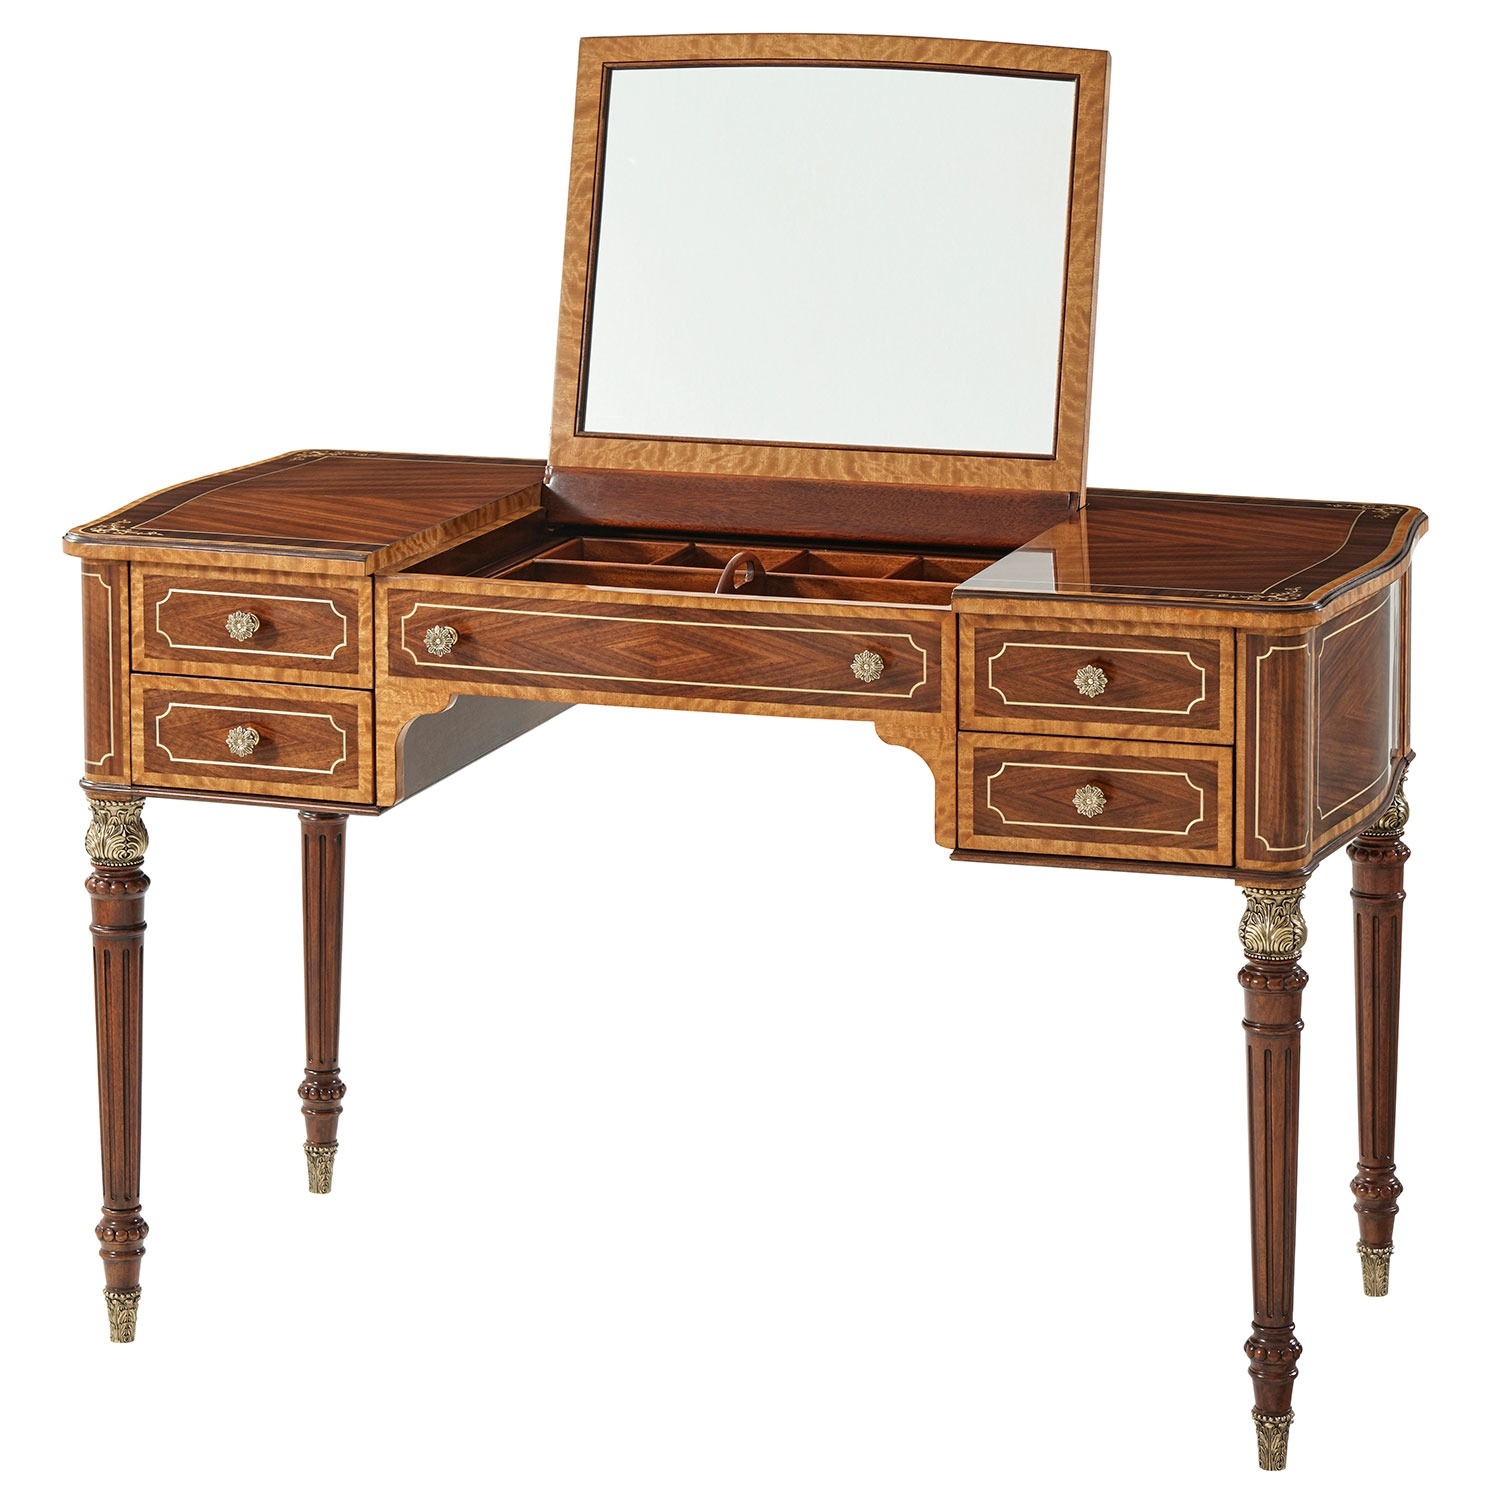 Theodore Alexander Floral Inlaid Mahogany Dressing Table